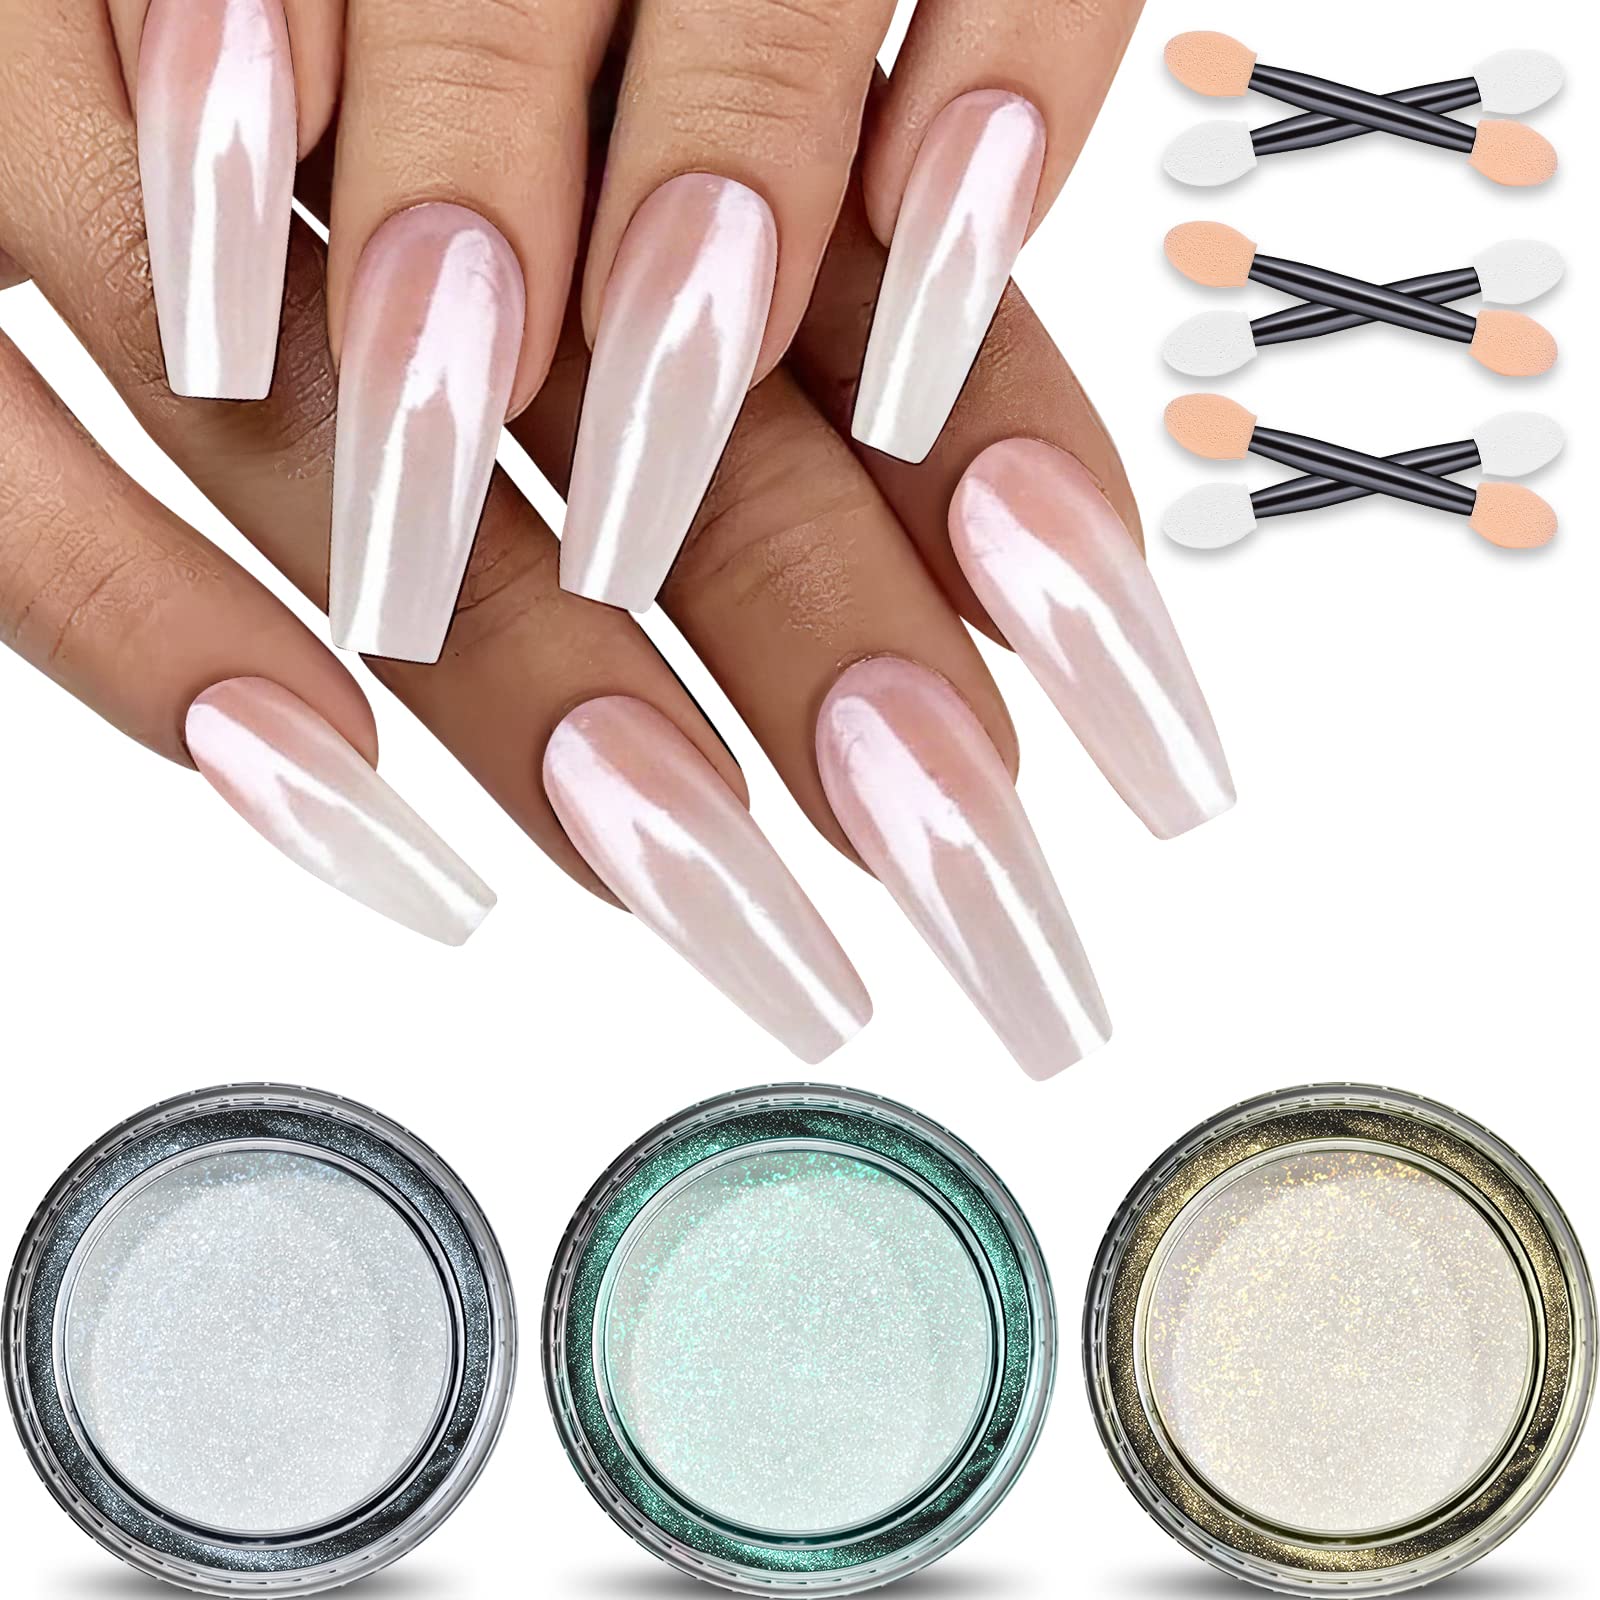 New-chrome NAIL Powder PIGMENT Color Mirrored Chrome Extacly Like Photos 